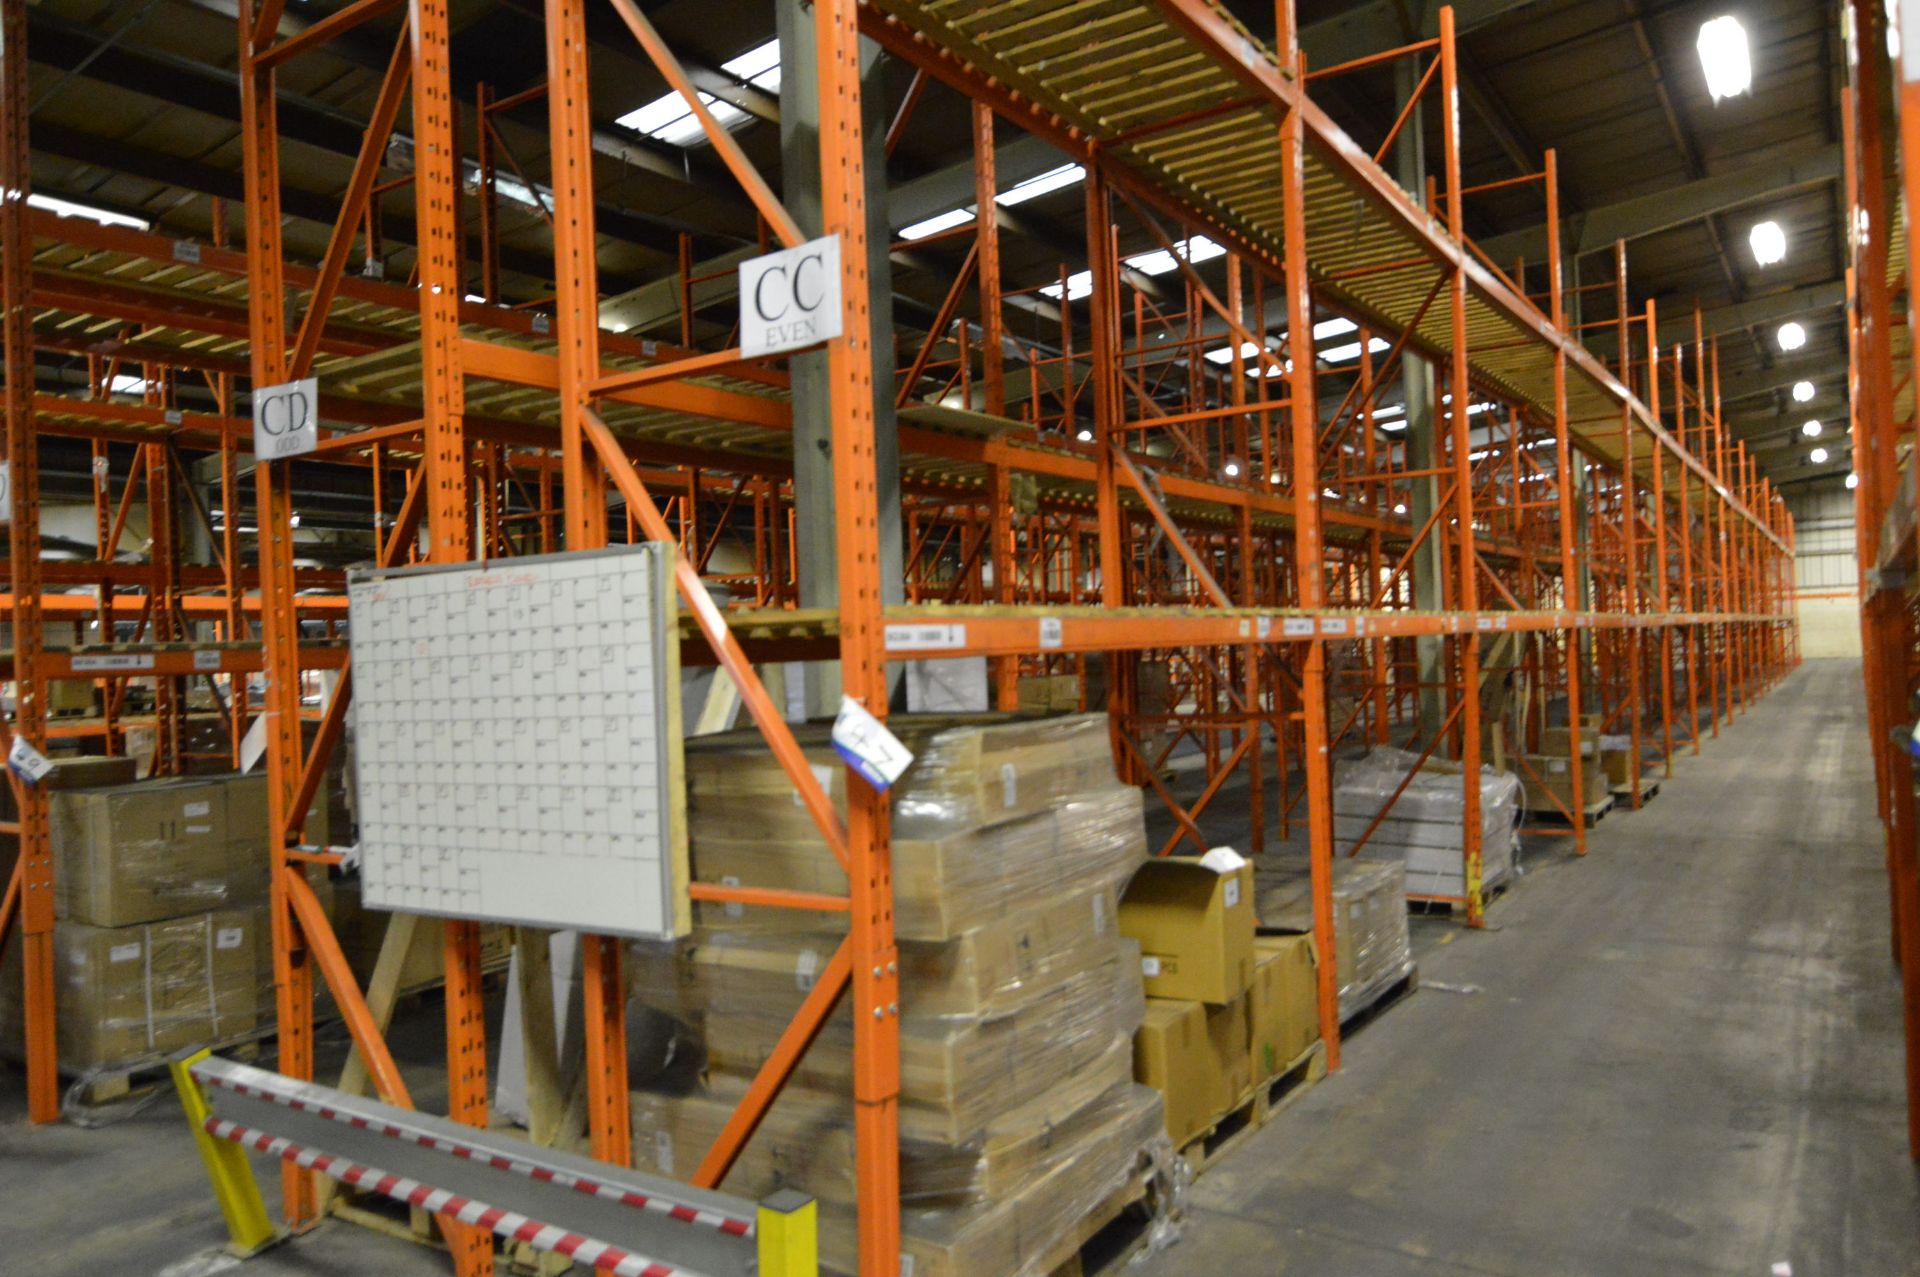 Redirack SD170 SINGLE SIDED 19 BAY TWO TIER PALLET RACK, approx. 52m long x 900mm x mainly 5.1m